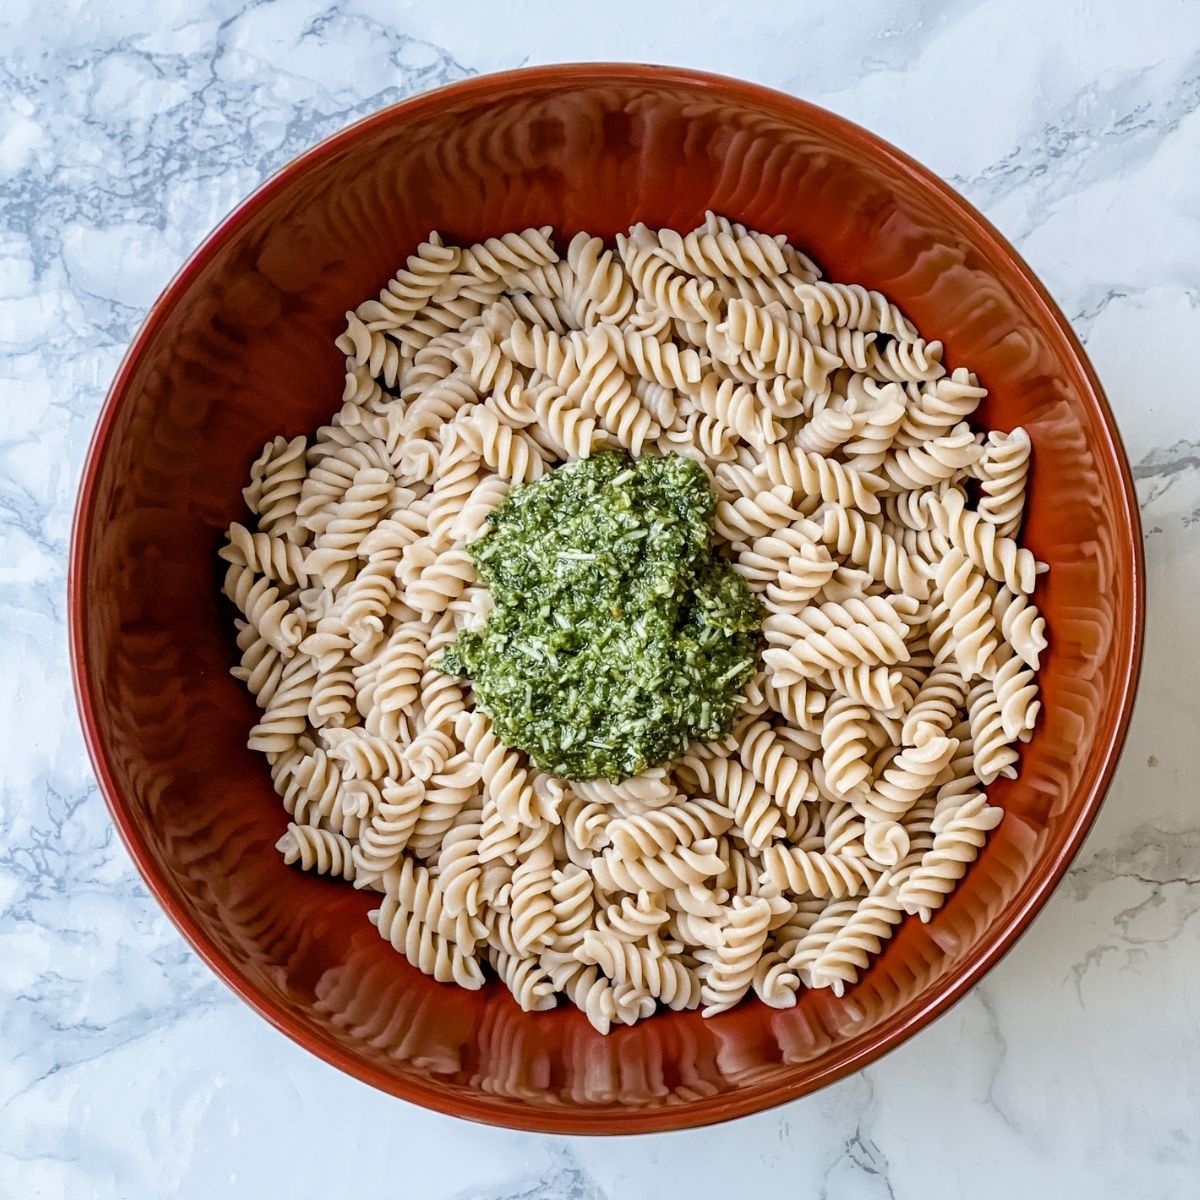 pesto on top of the pasta in a large bowl.